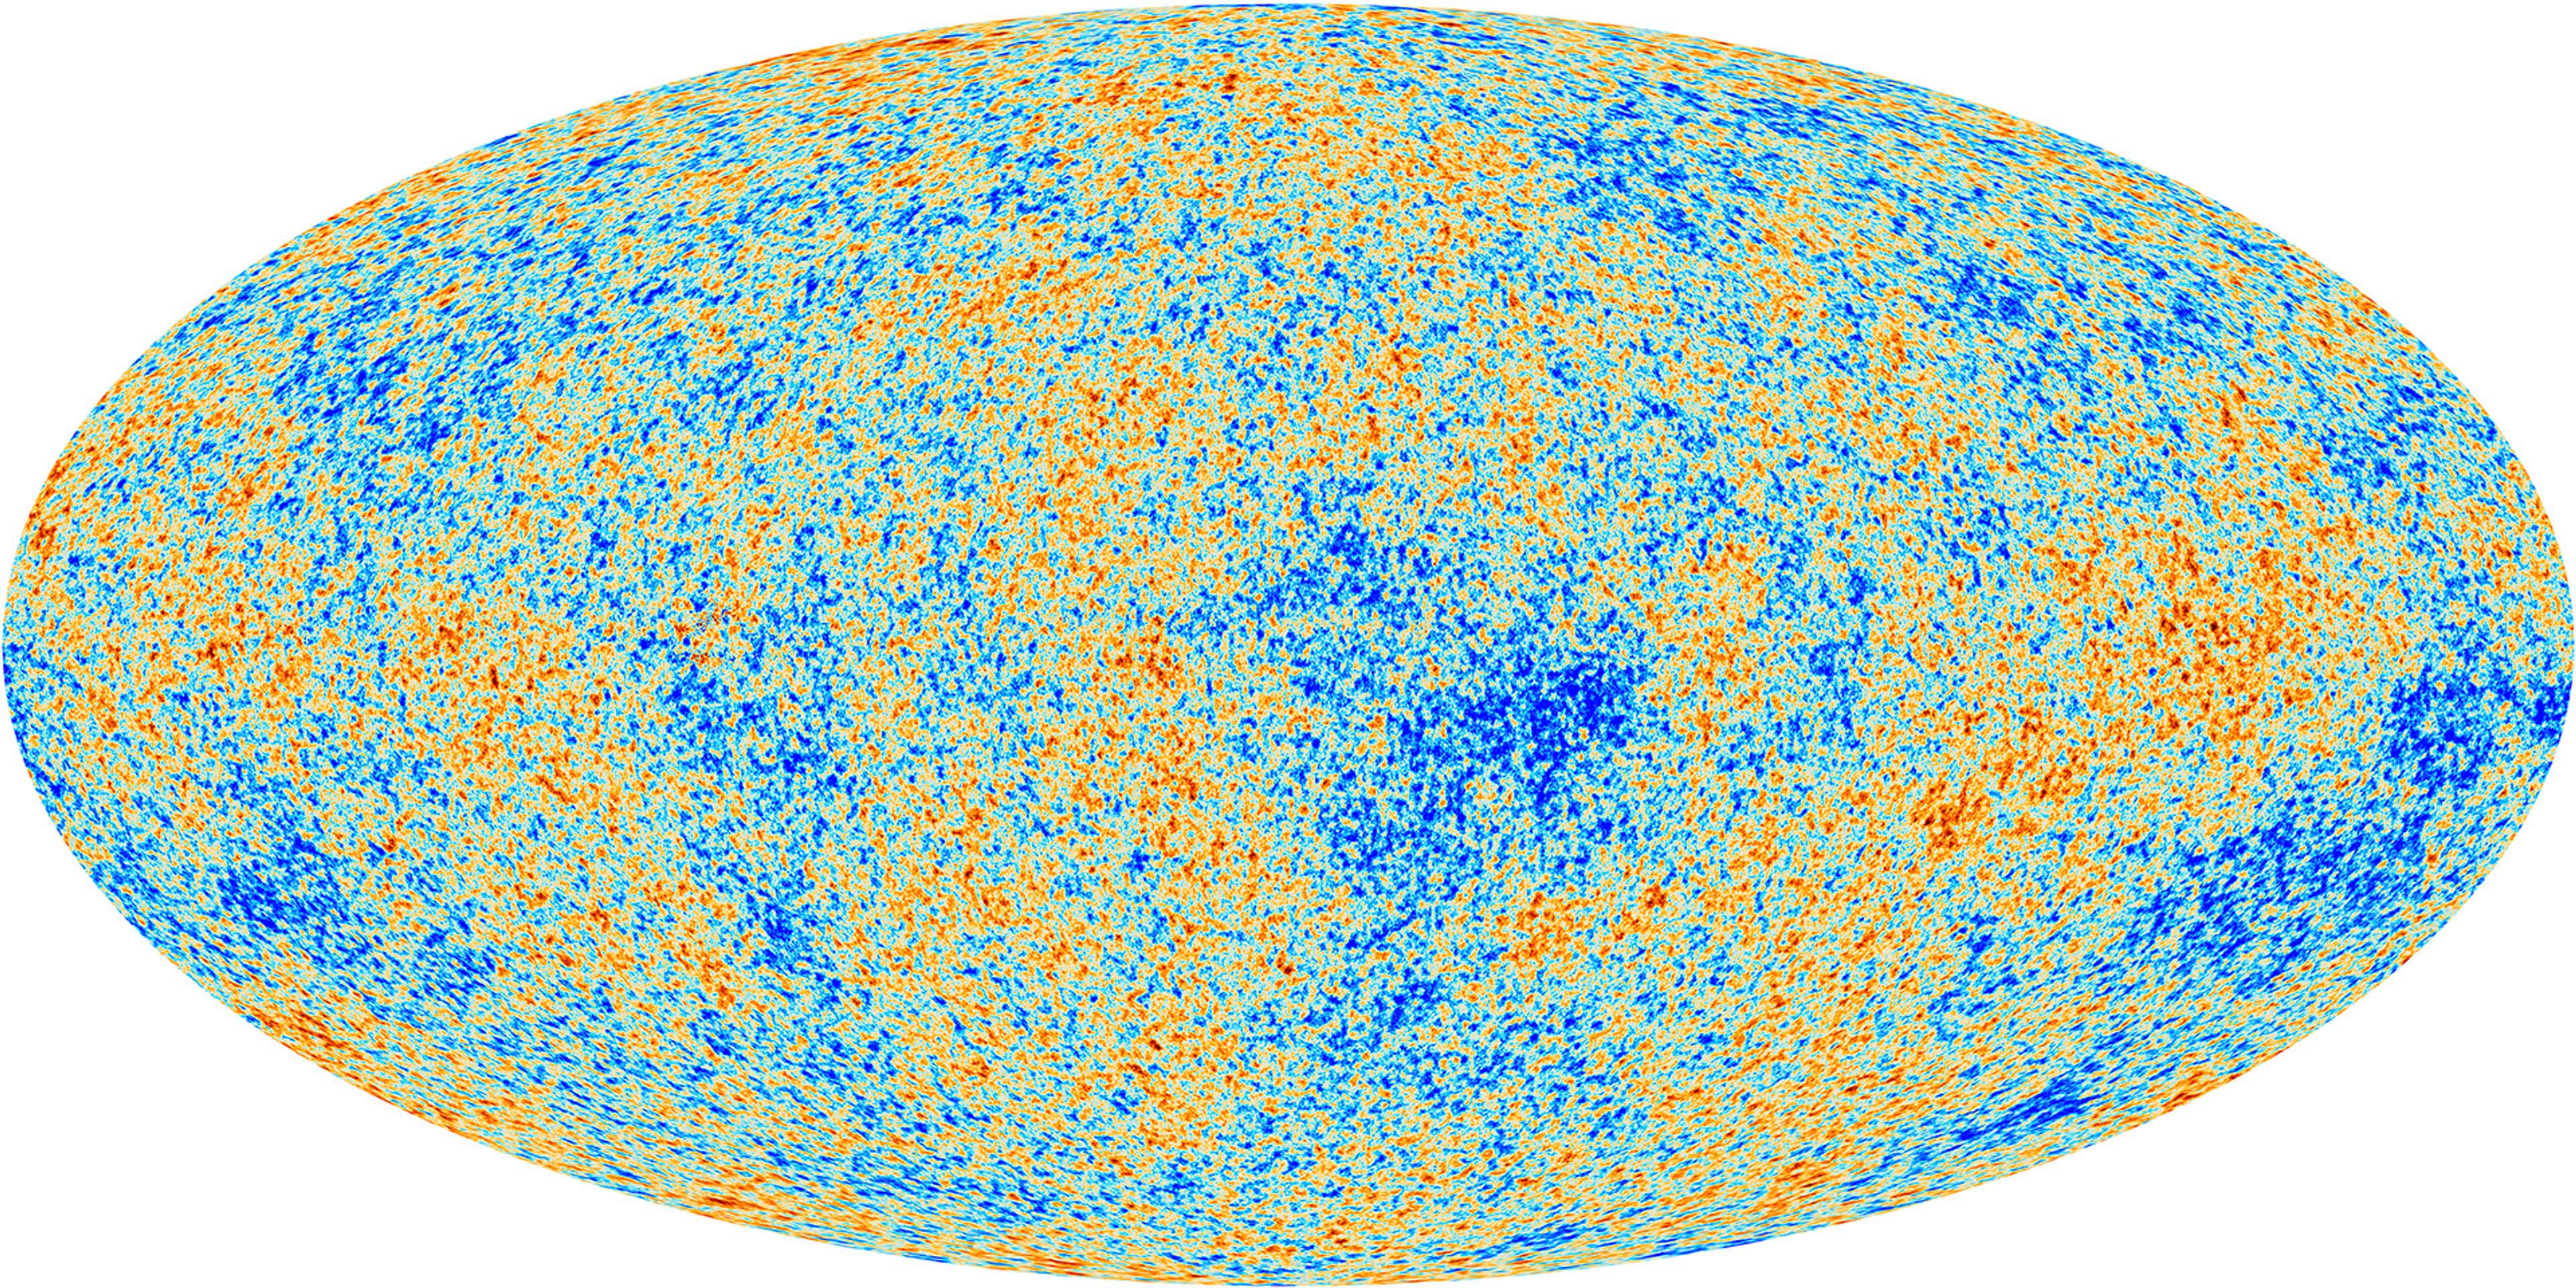 An image of the cosmic microwave background